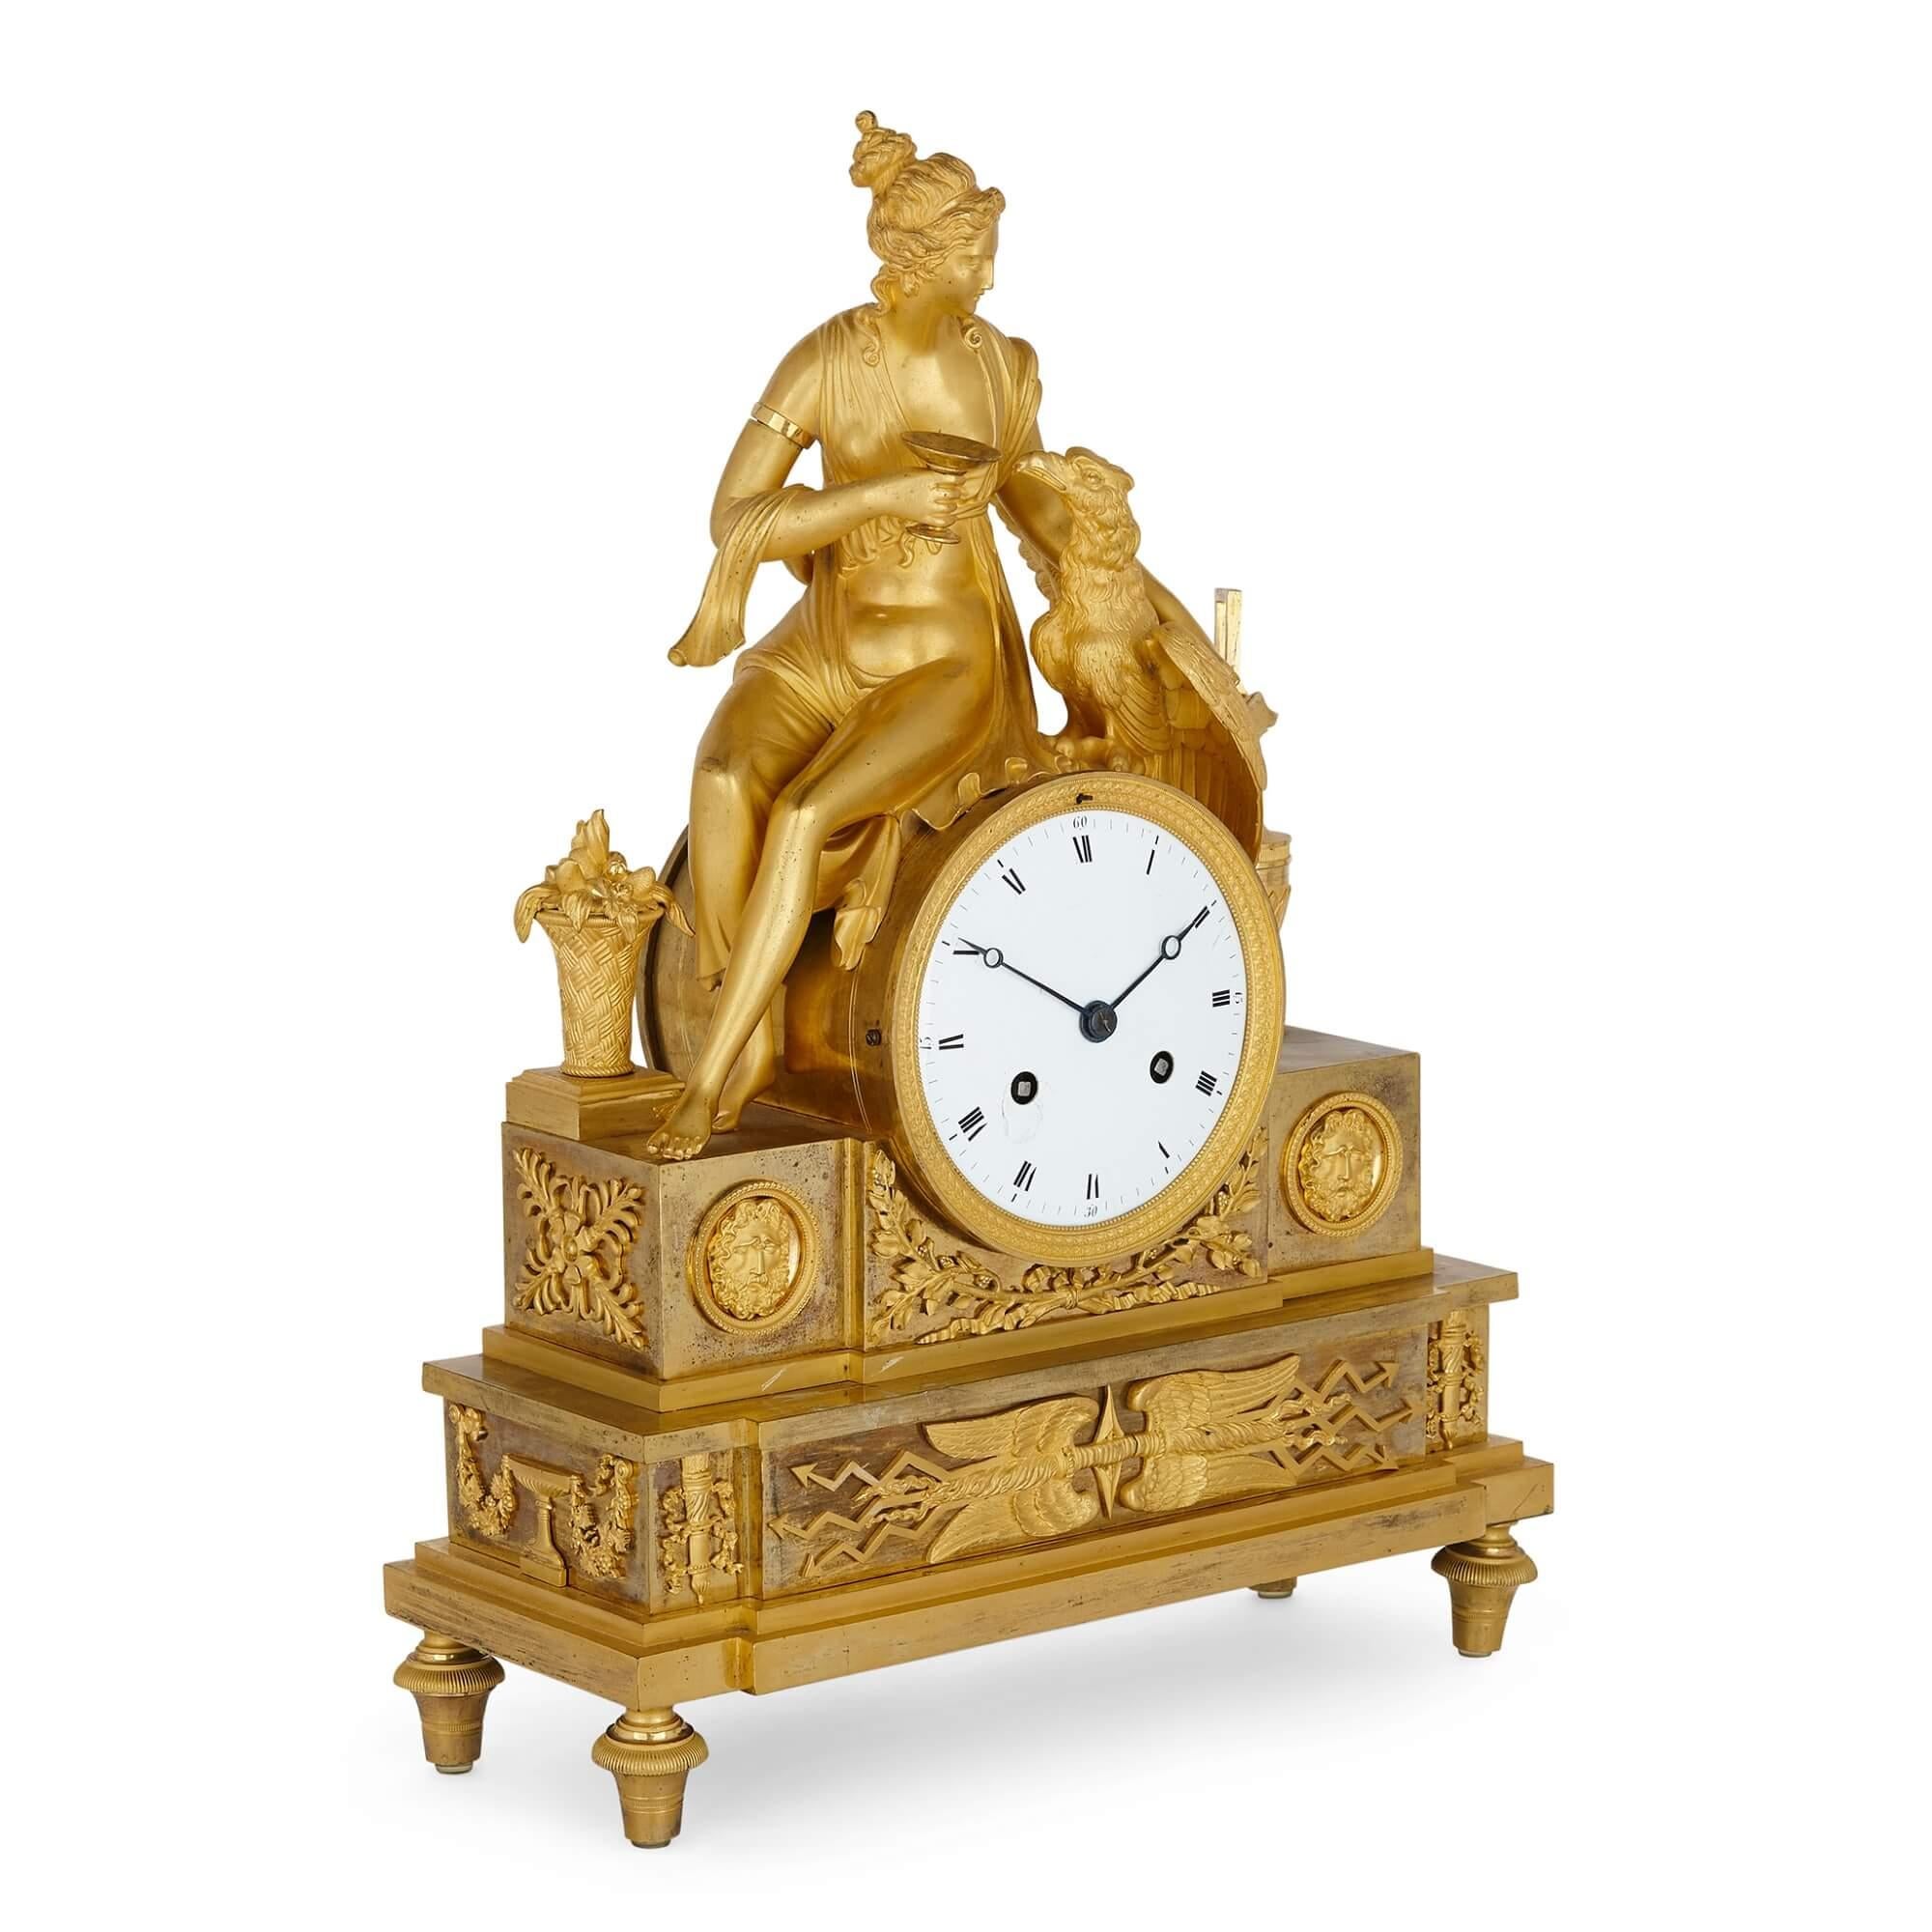 This fine neoclassical style mantel clock is from the early 19th century. The clock is cast in gilt bronze, and features the surmounting figure of Asteria seated with the figure of an eagle, who is Zeus transformed. The story is taken from Greek